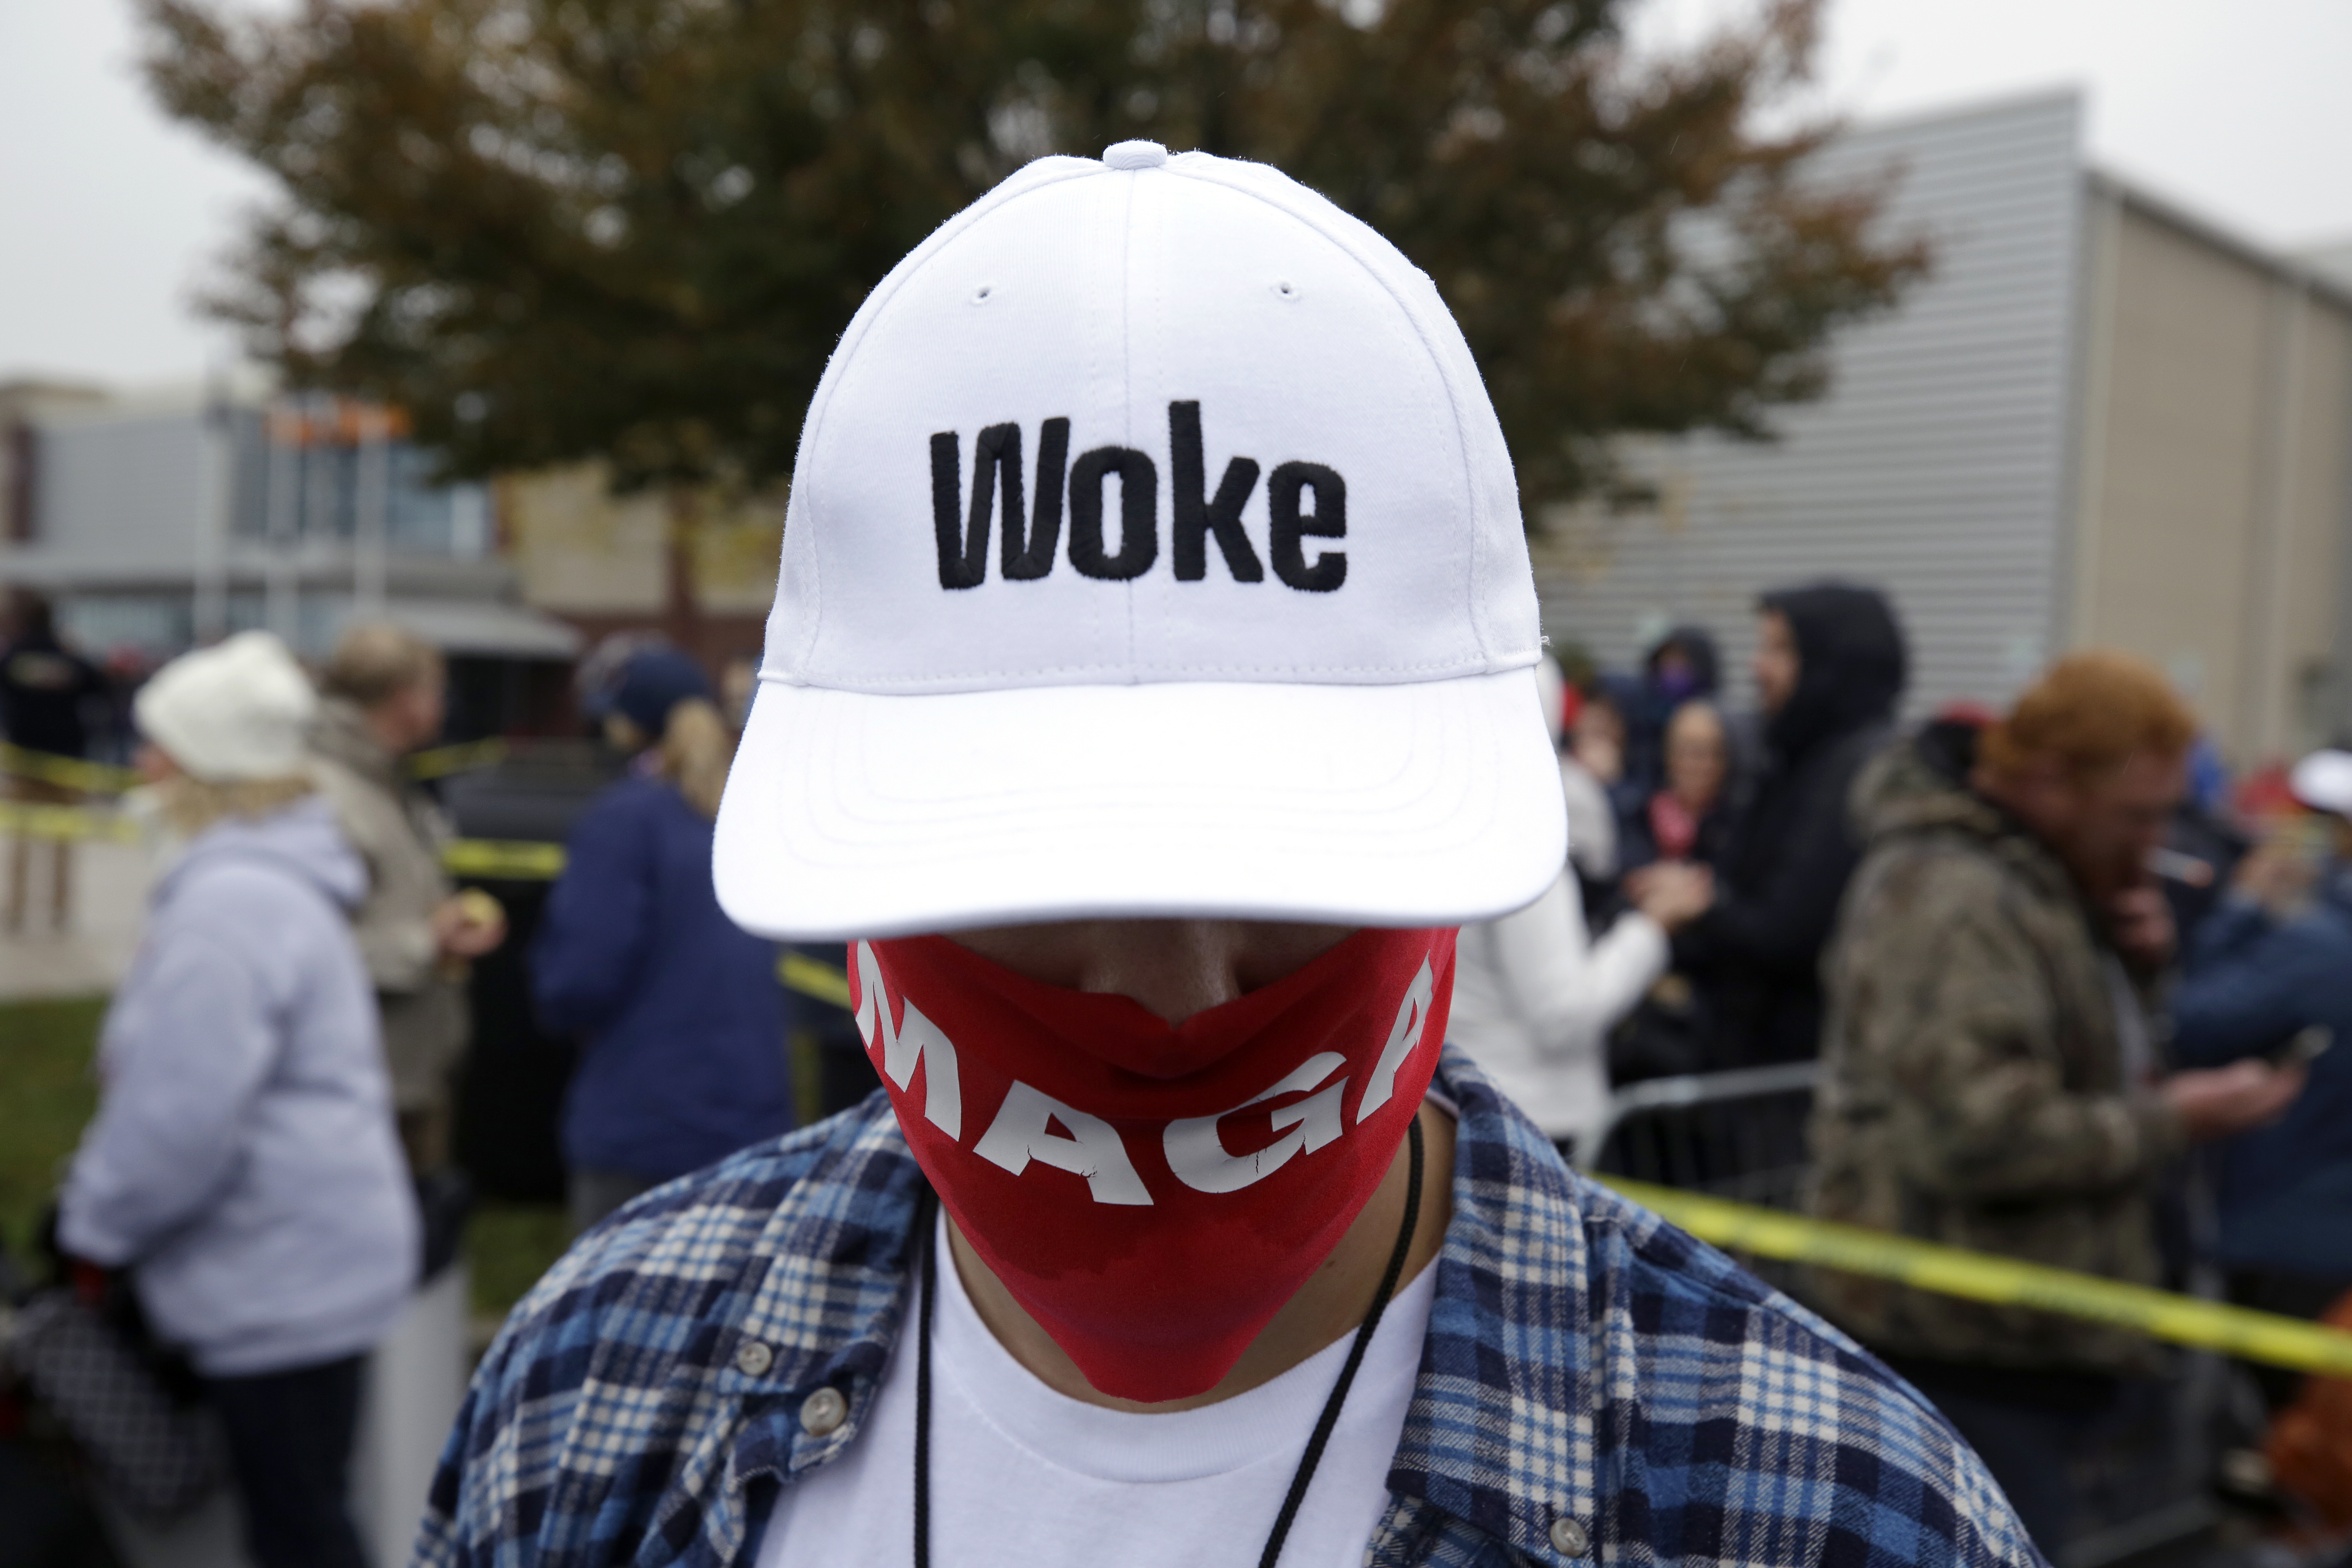 Issue of the day: M&Ms go 'woke' with a redesign